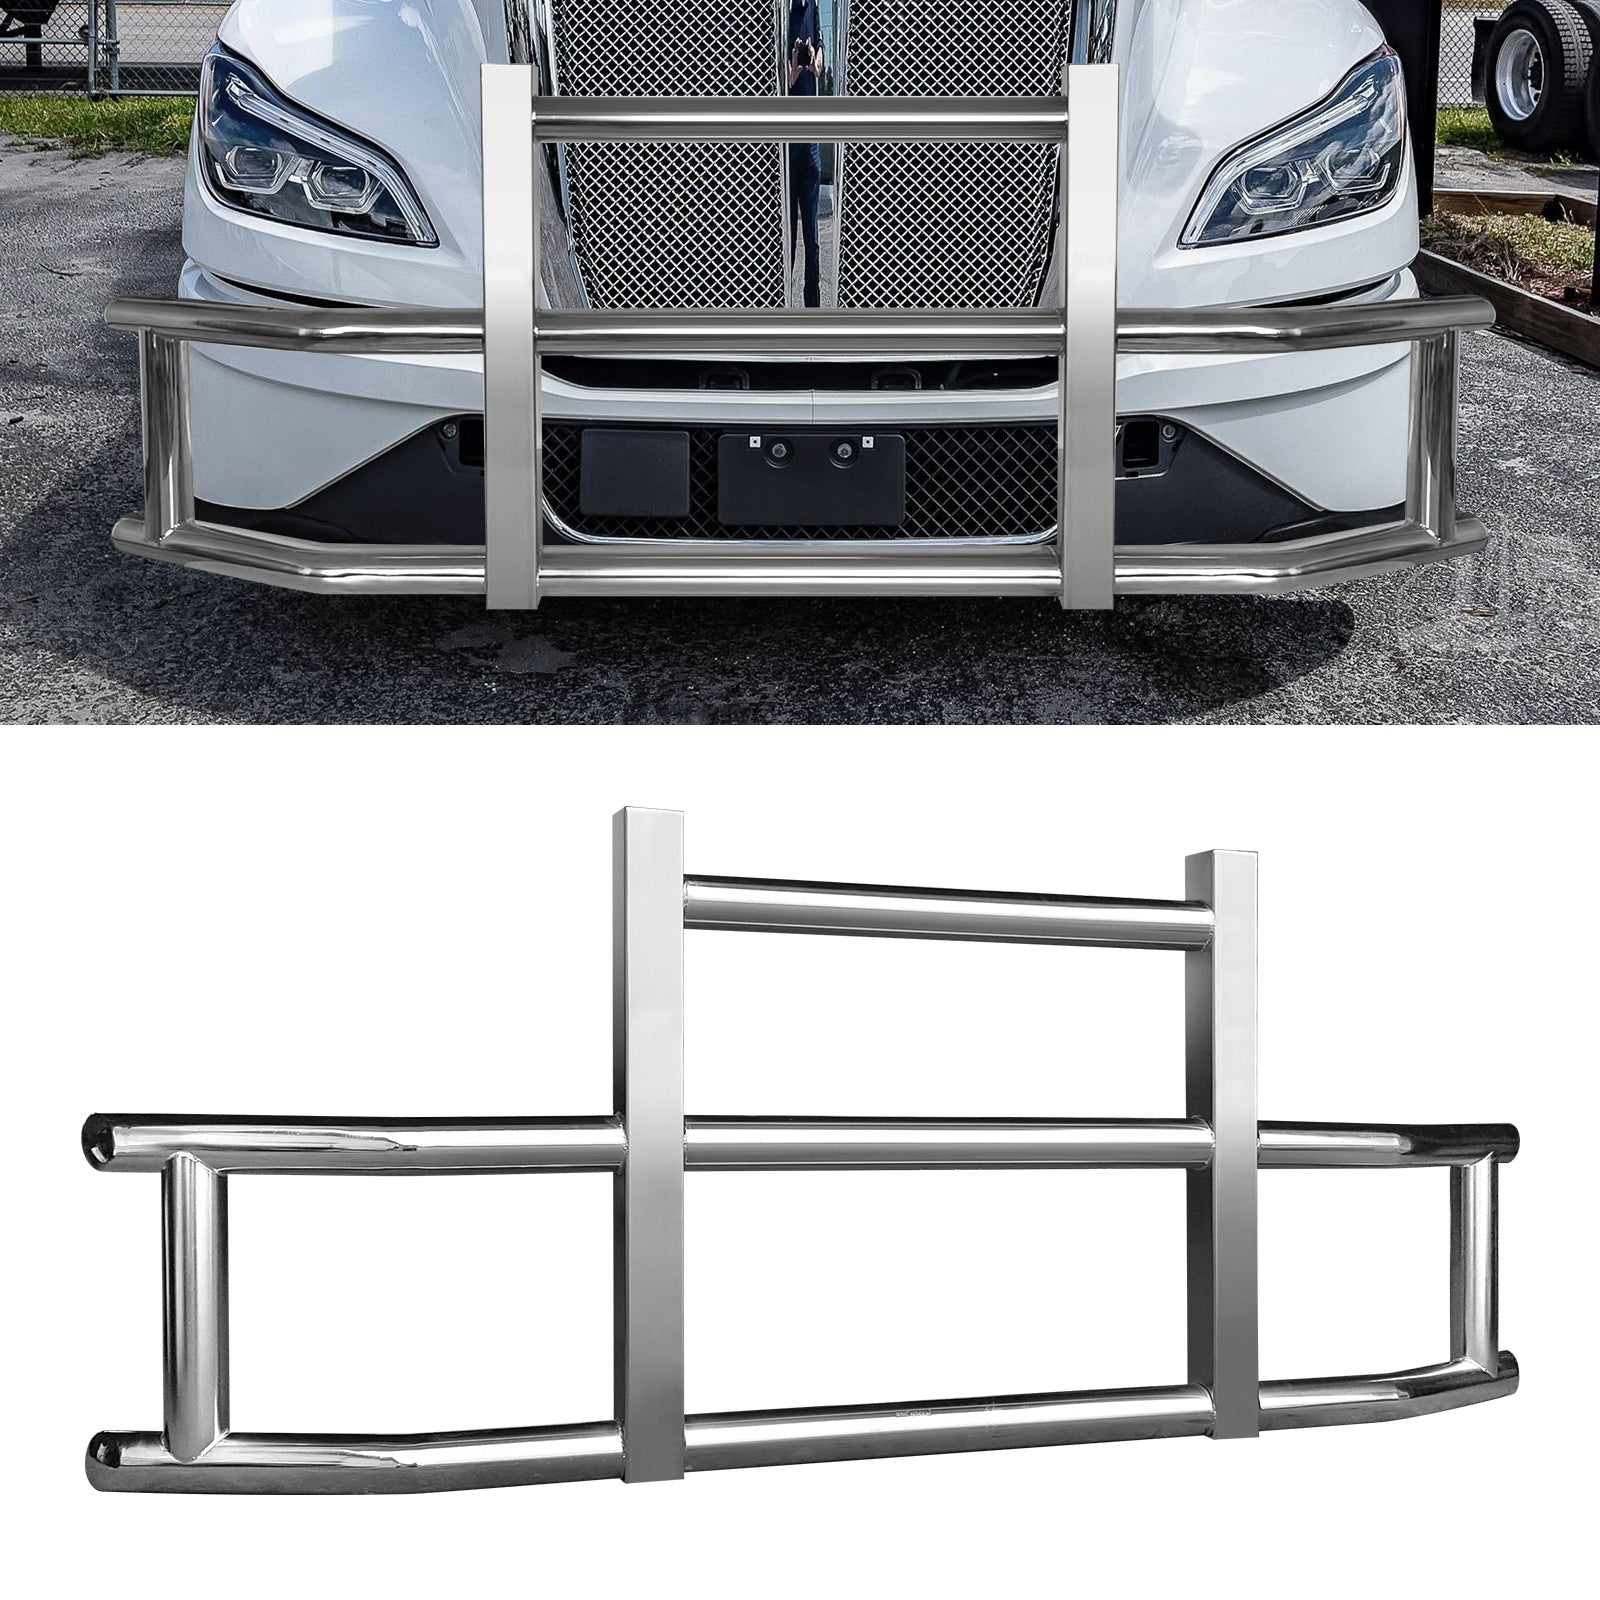 Stainless Steel Deer Guard Bumper for Kenworth T680 chrome-stainless steel